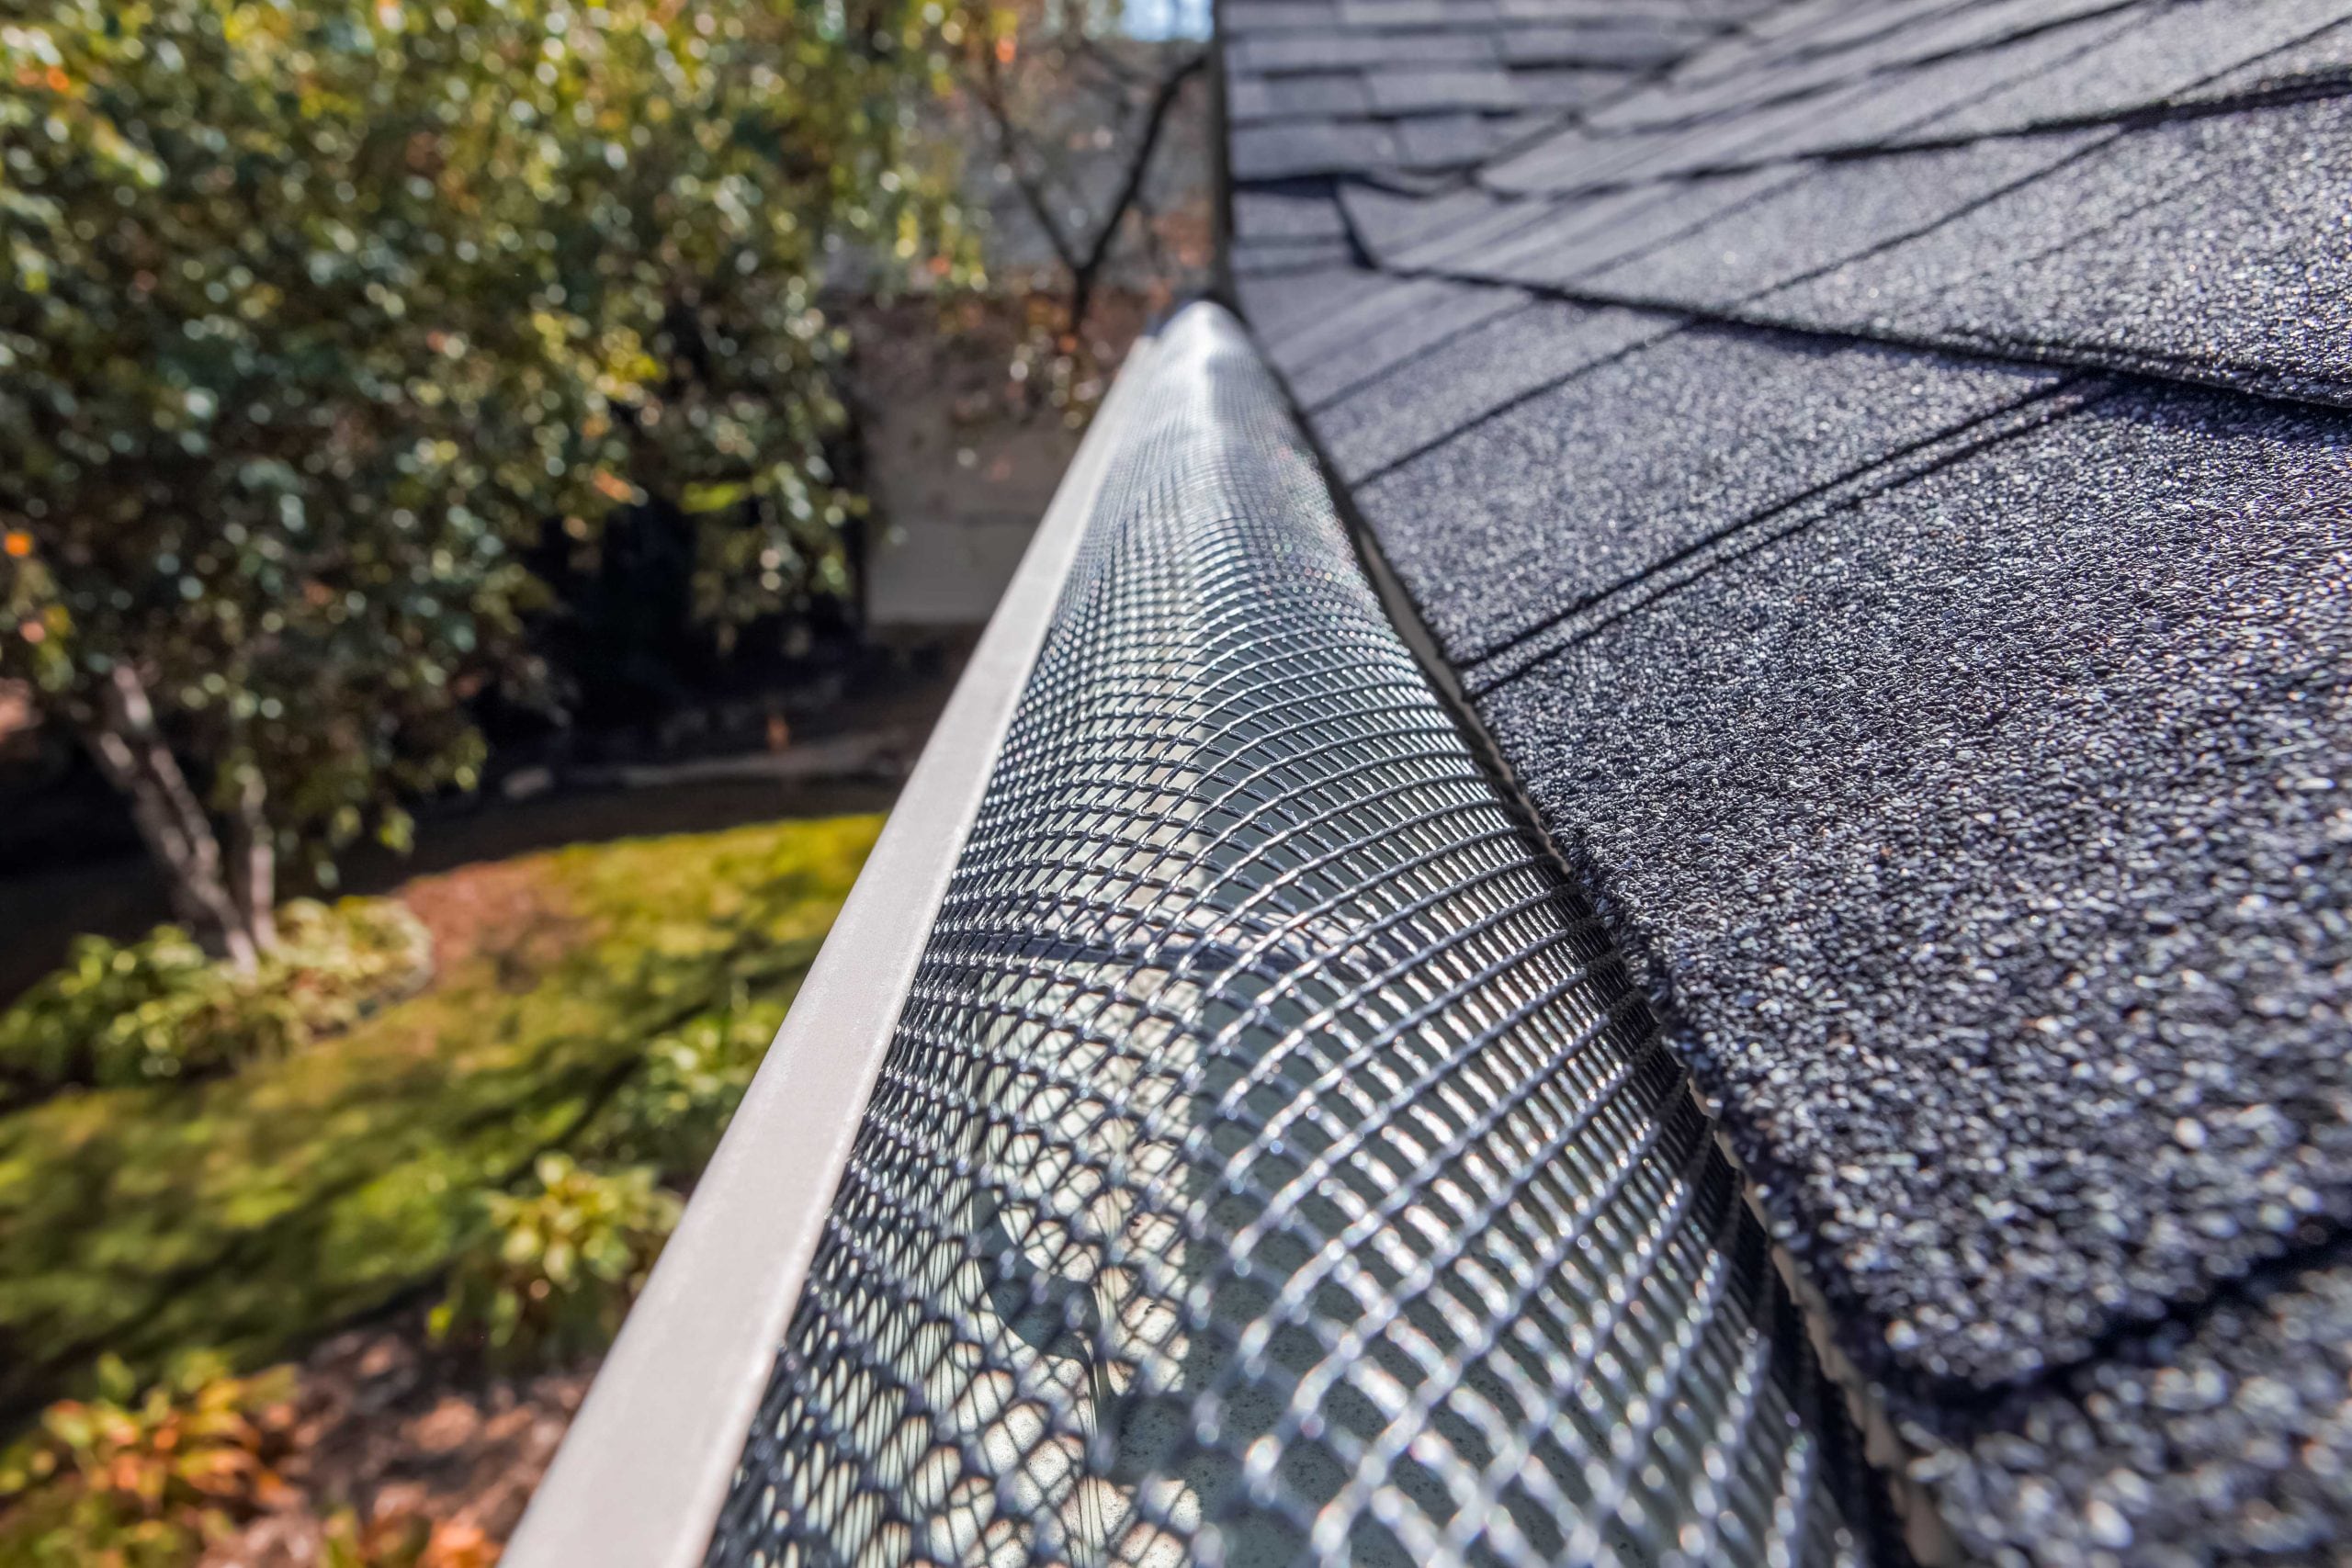 Protective gutter guard preventing falling leaves from clogging a residential gutter